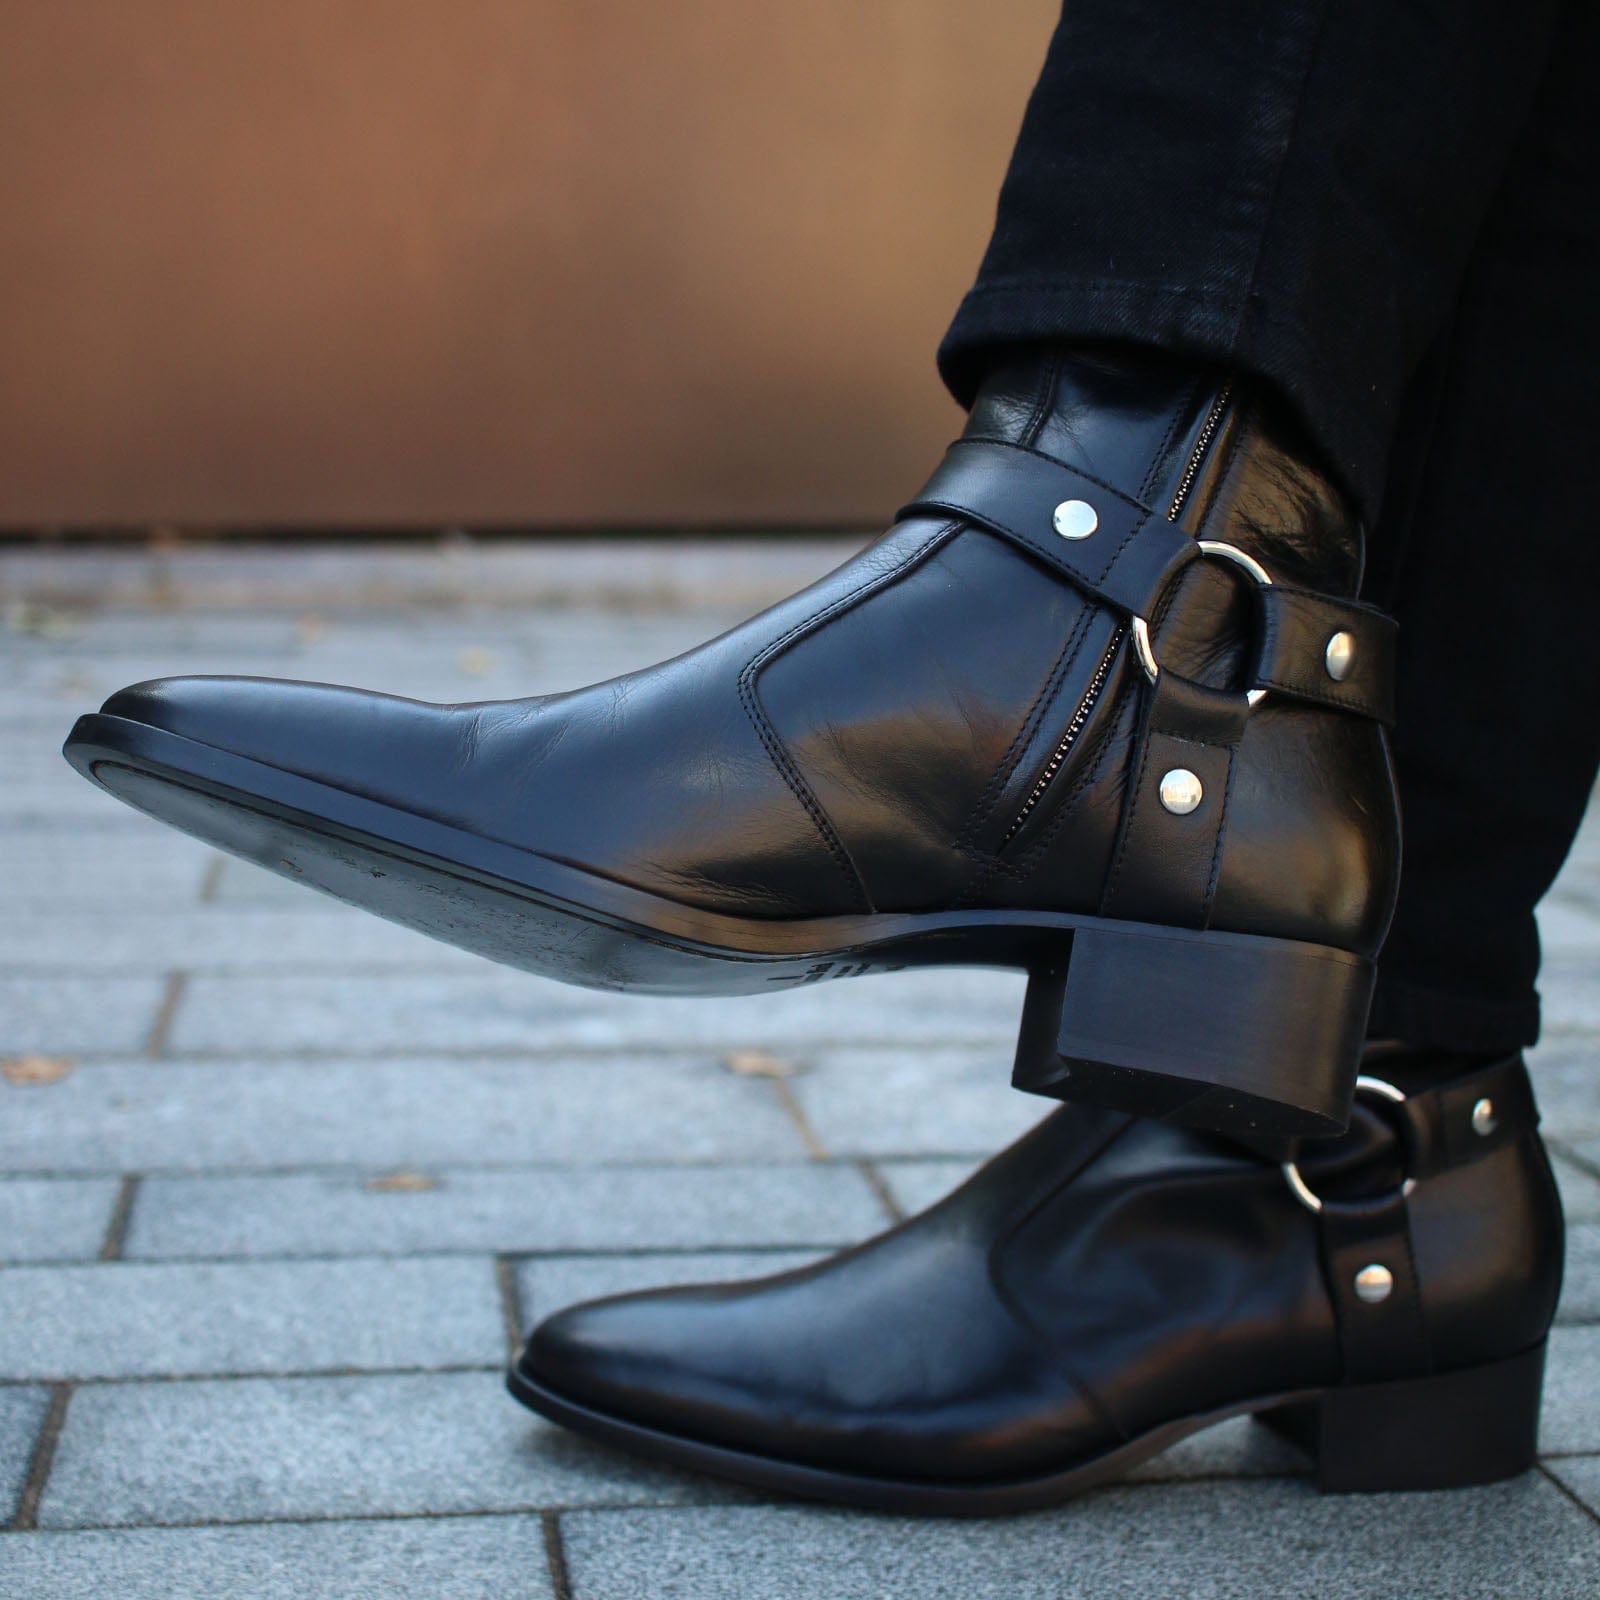 Silhouette Ankle Boots - Luxury Black